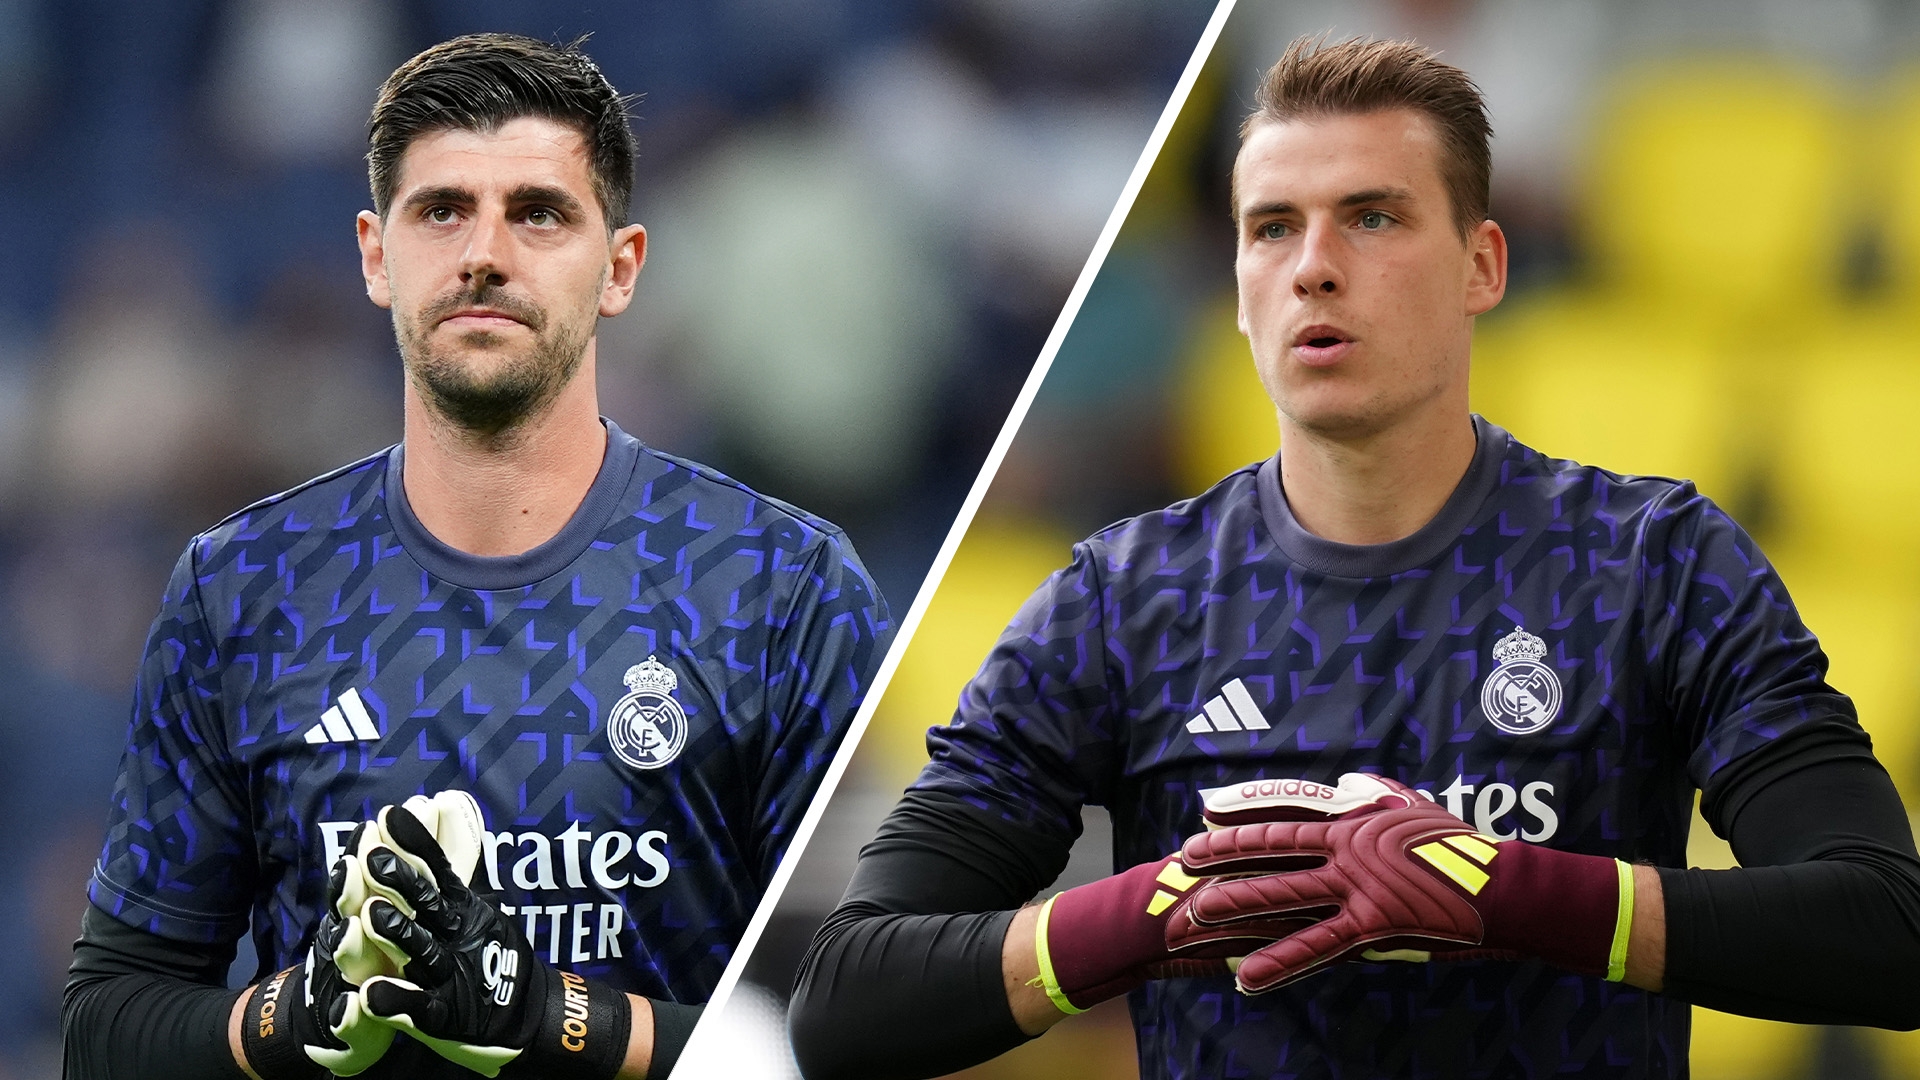 Does Courtois deserve to start the UCL final for Real Madrid?